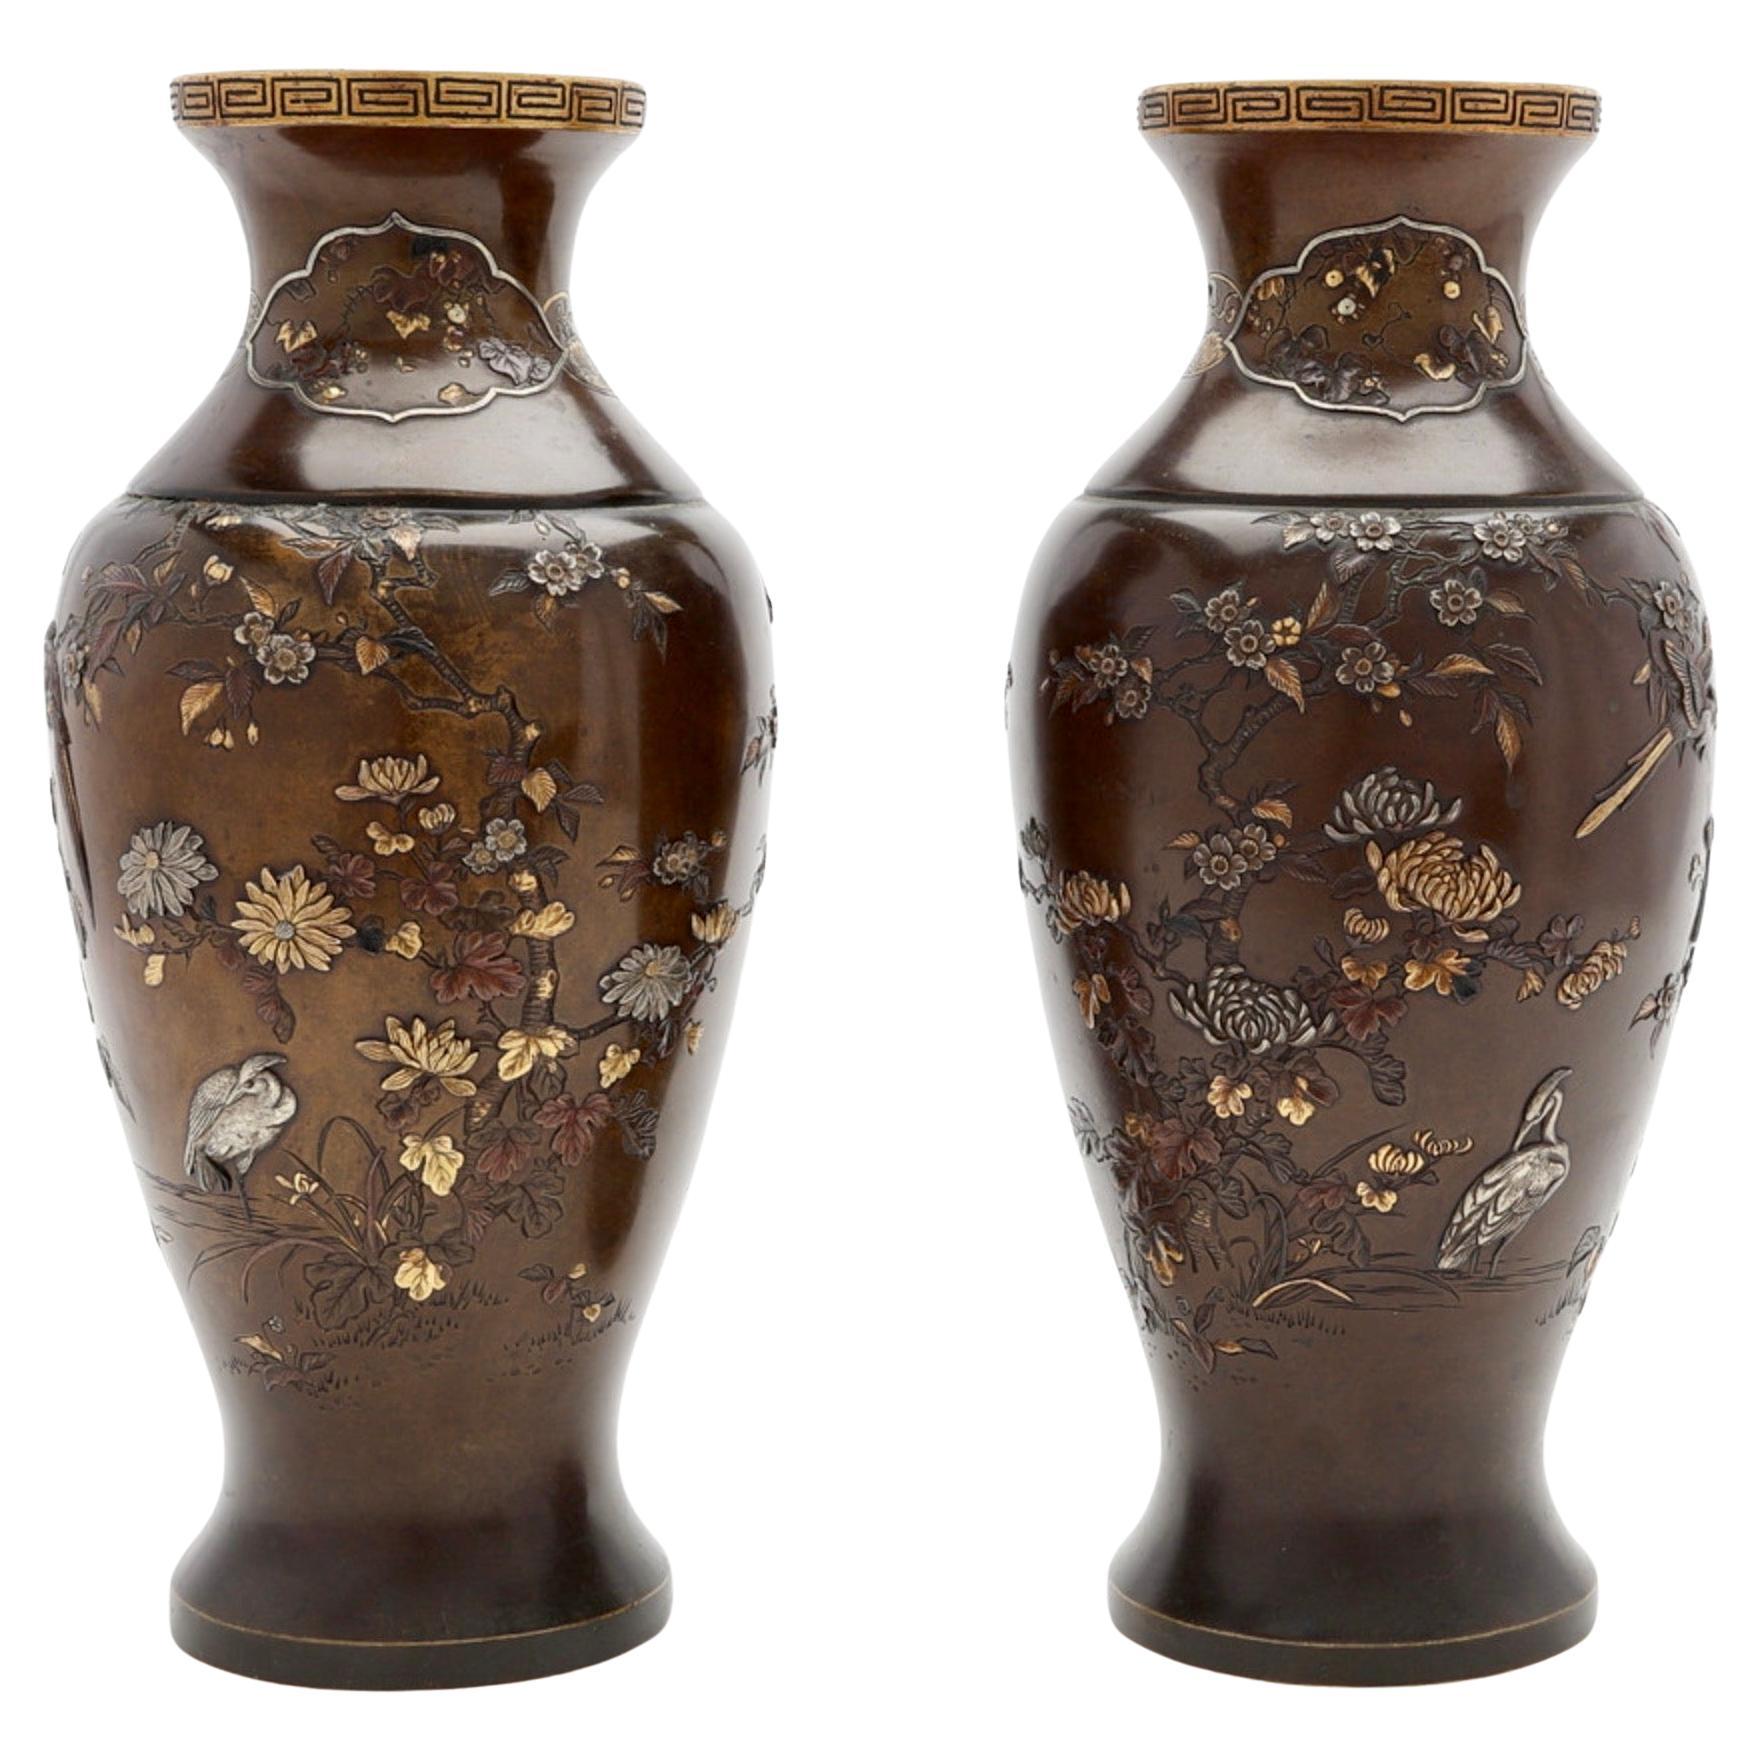 Pair of Japanese urns. 19th c. Meiji period. Signed. For Sale